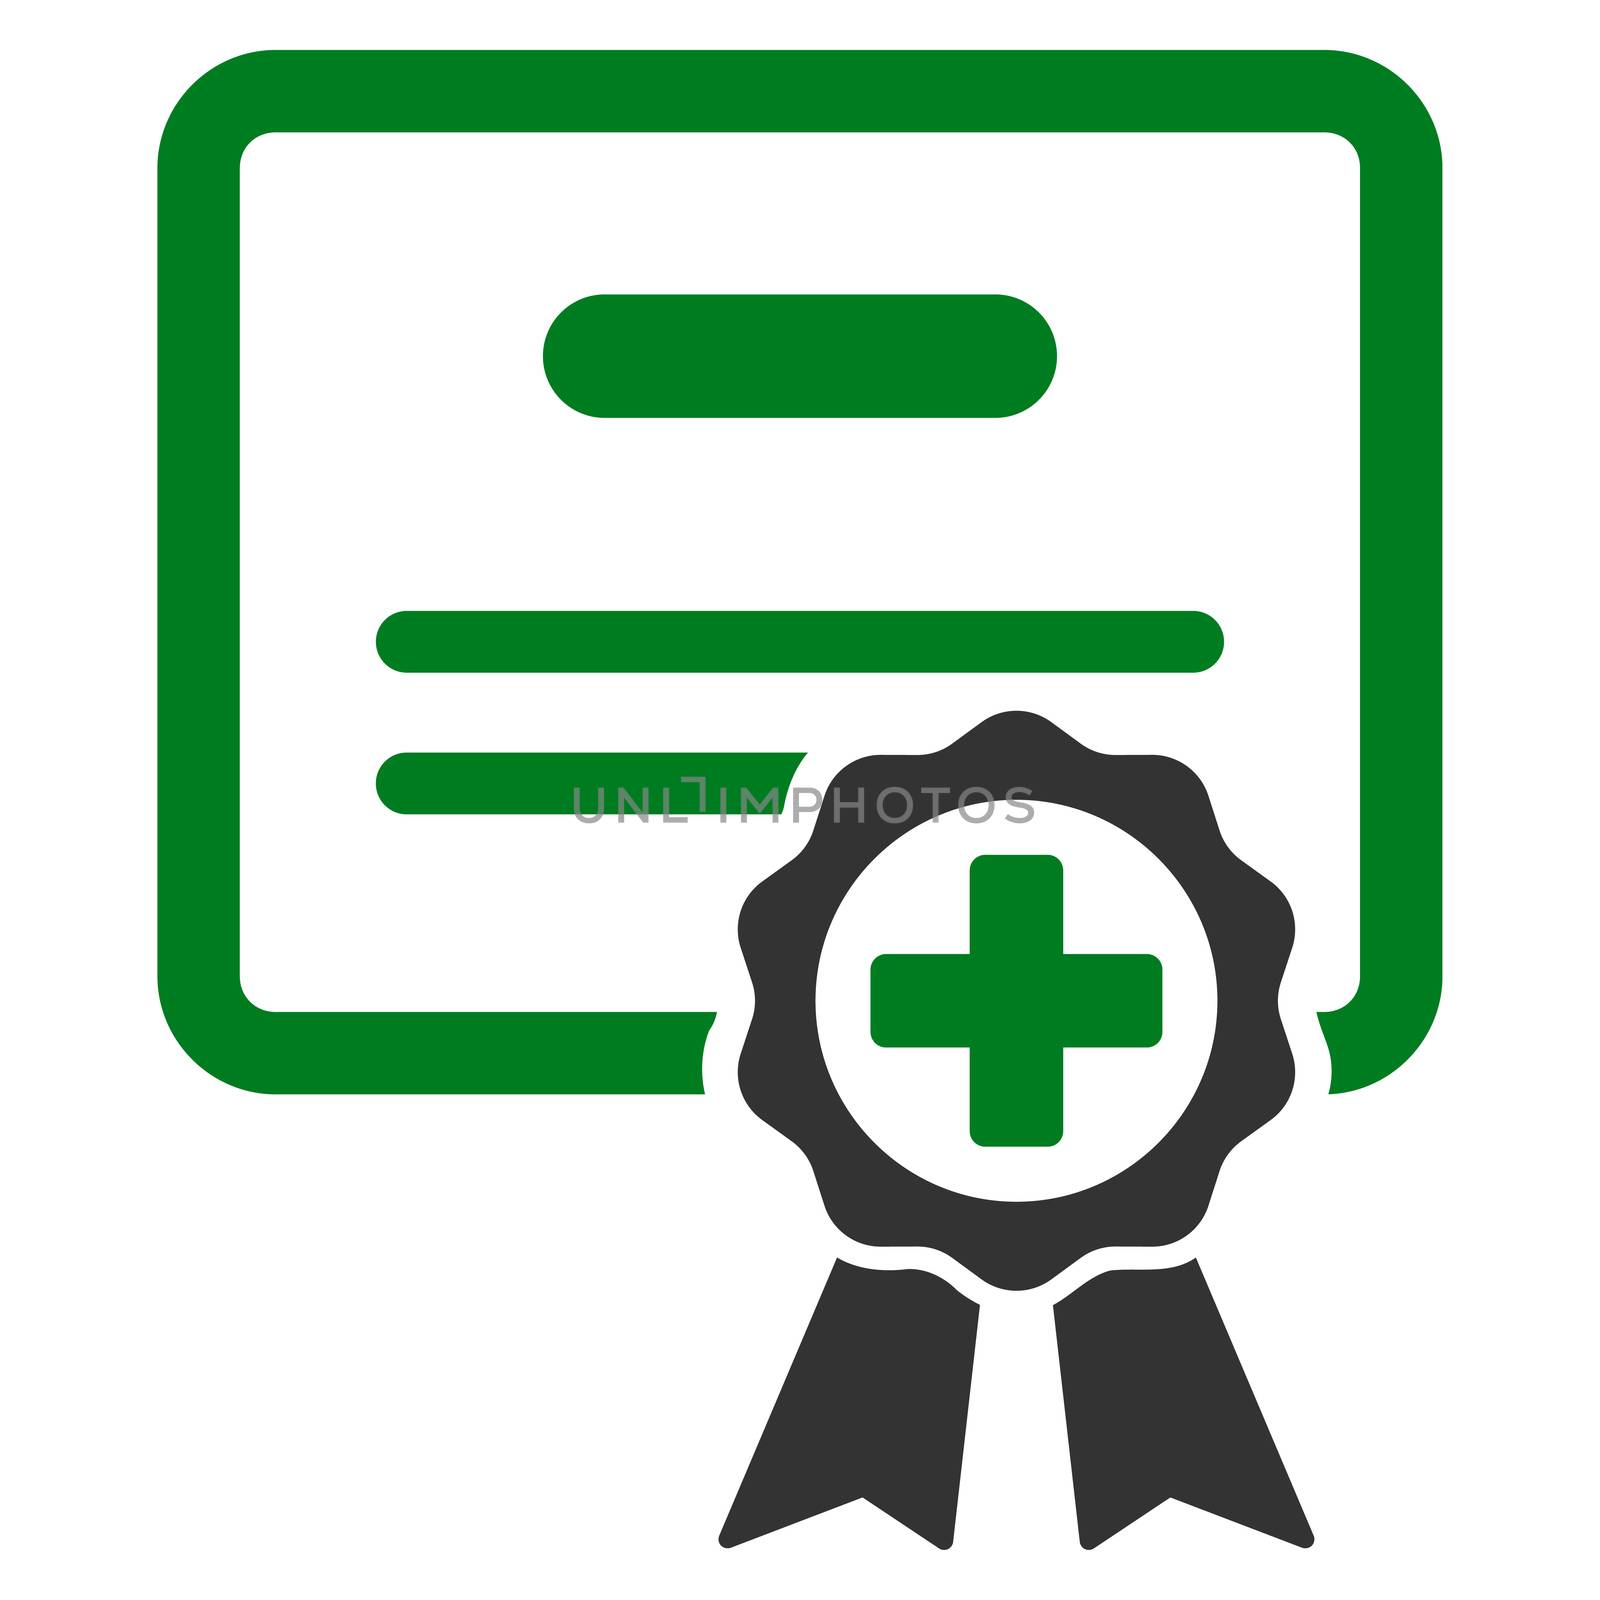 Medical Certificate raster icon. Style is bicolor flat symbol, green and gray colors, rounded angles, white background.